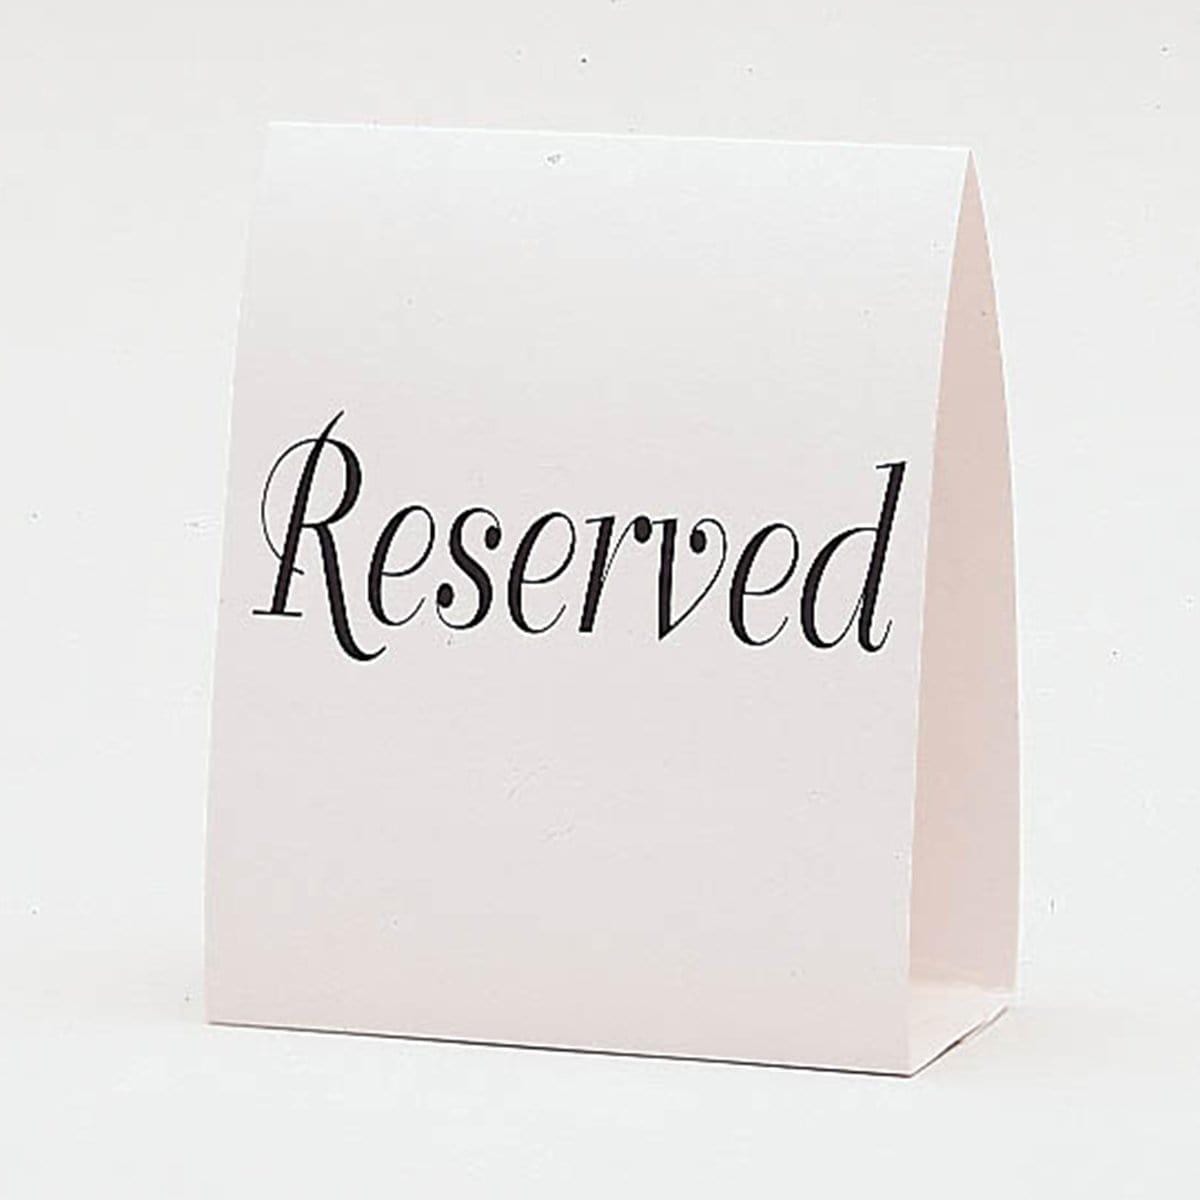 Buy Party Supplies Tablecard "Reserved" sold at Party Expert